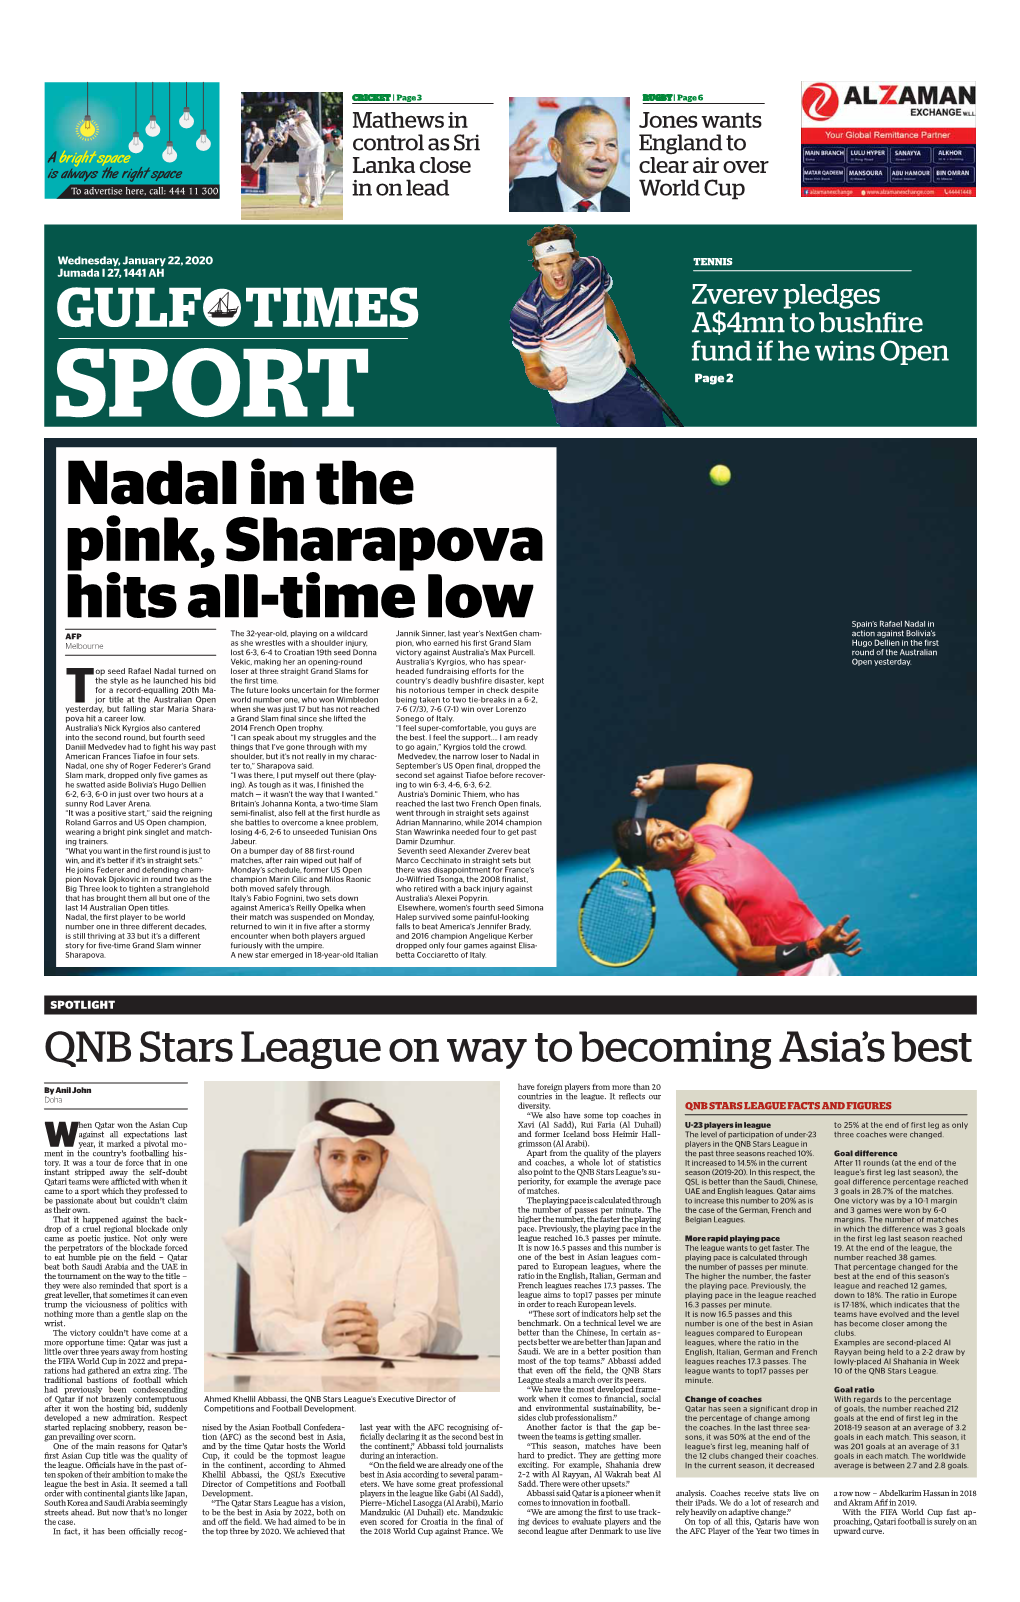 Nadal in the Pink, Sharapova Hits All-Time